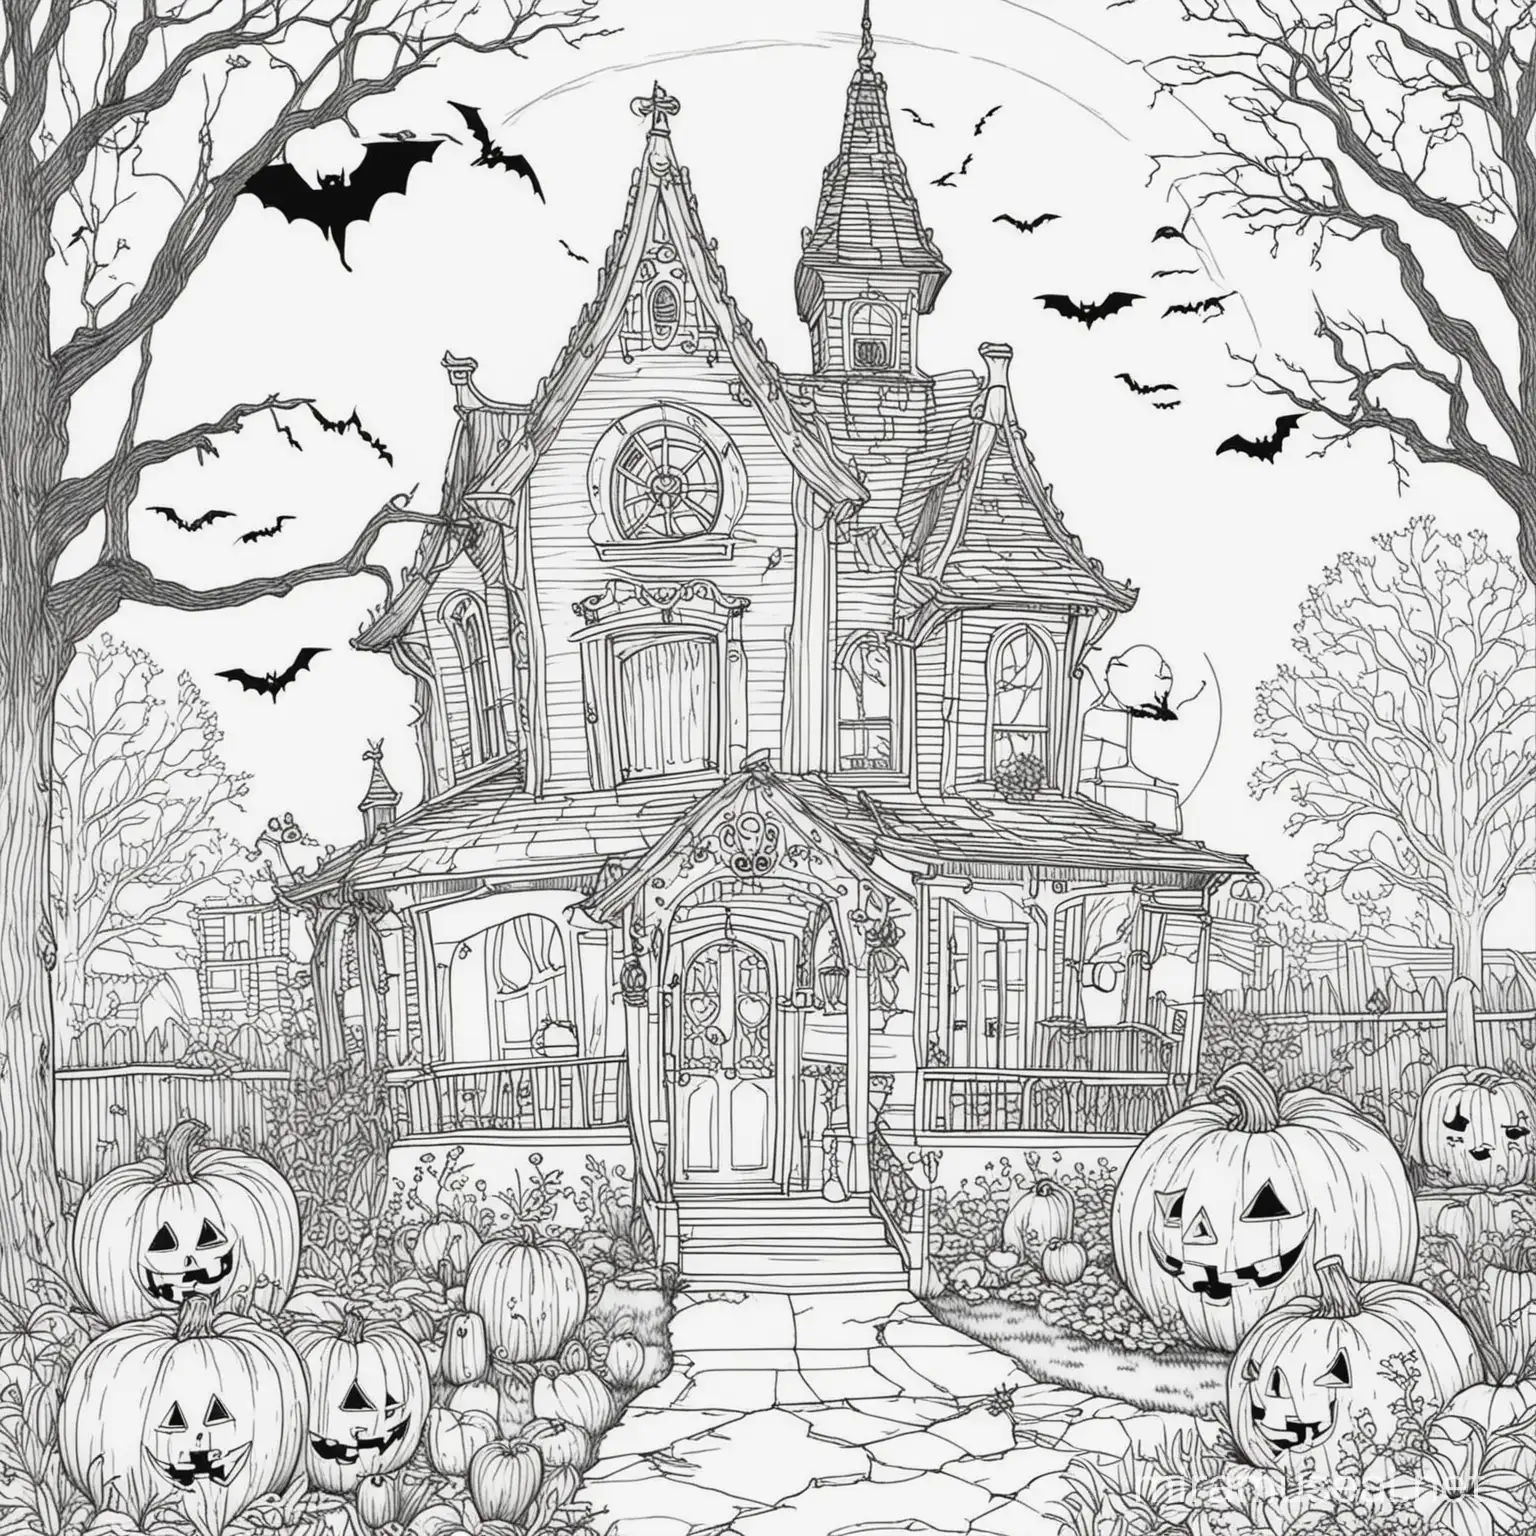 Spooky Halloween Coloring Page with Witches and Pumpkins